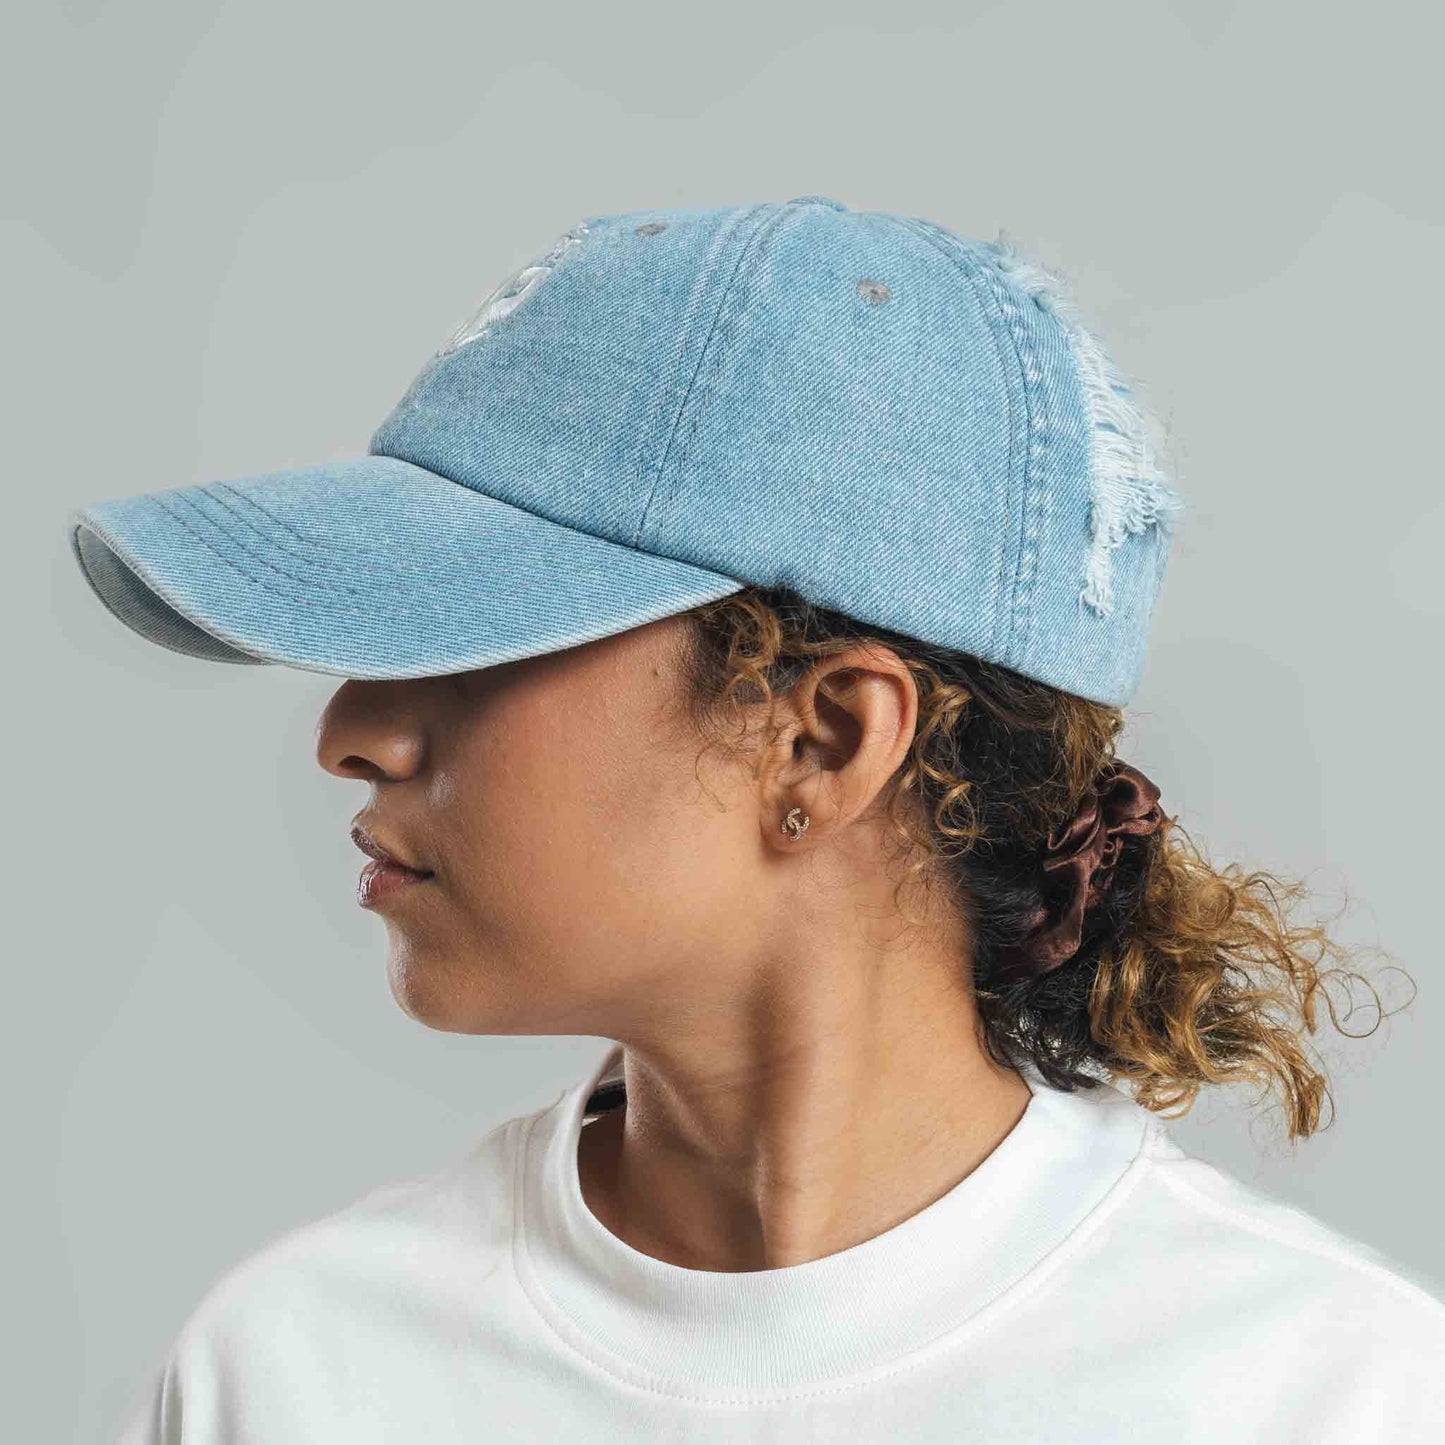 Ripped Denim Cap with 3D Logo Embroidery